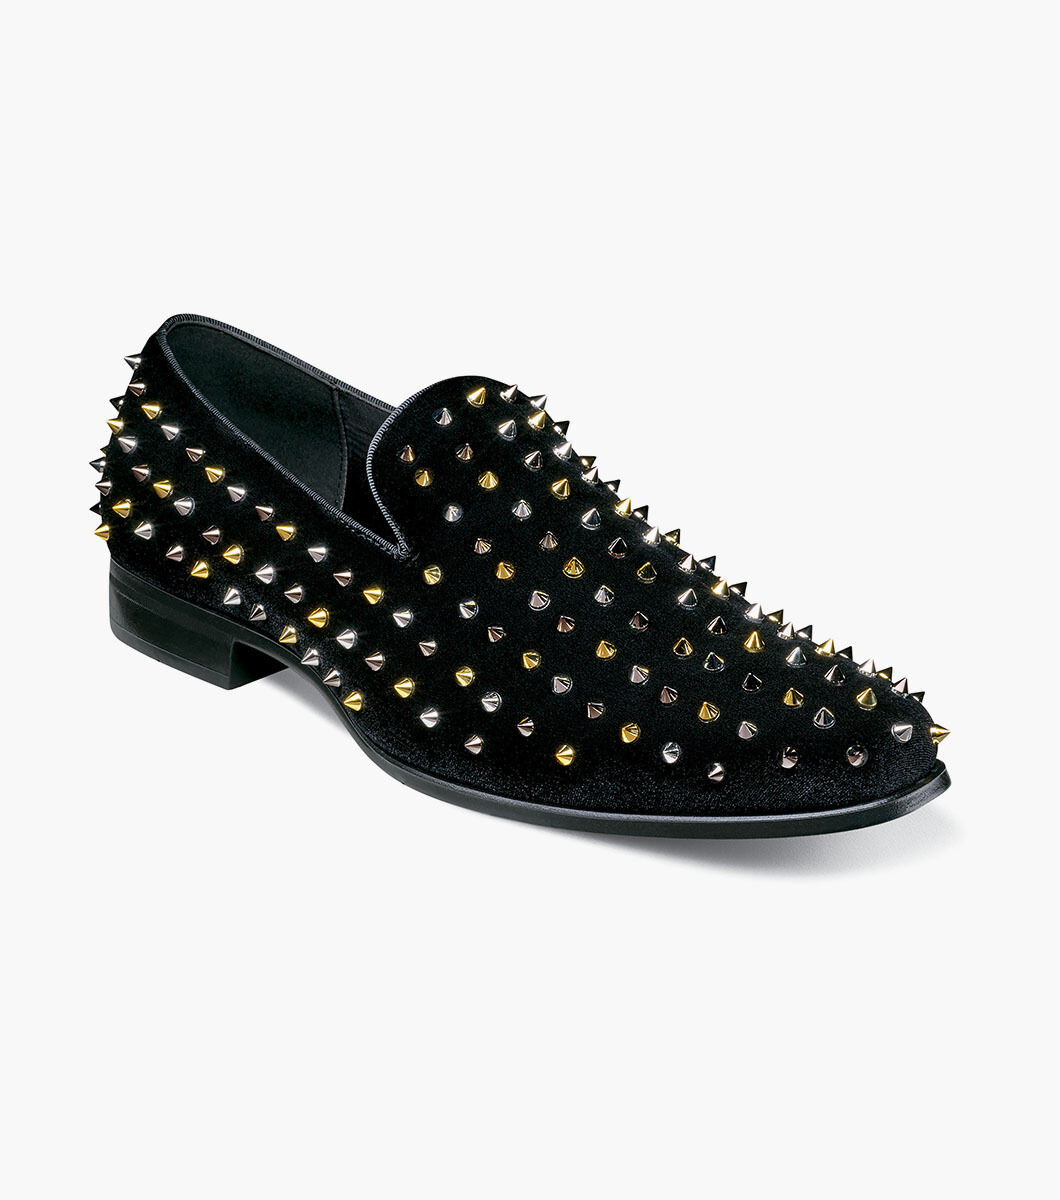 Spire Spiked Slip On Clearance Men's Shoes | Stacyadams.com